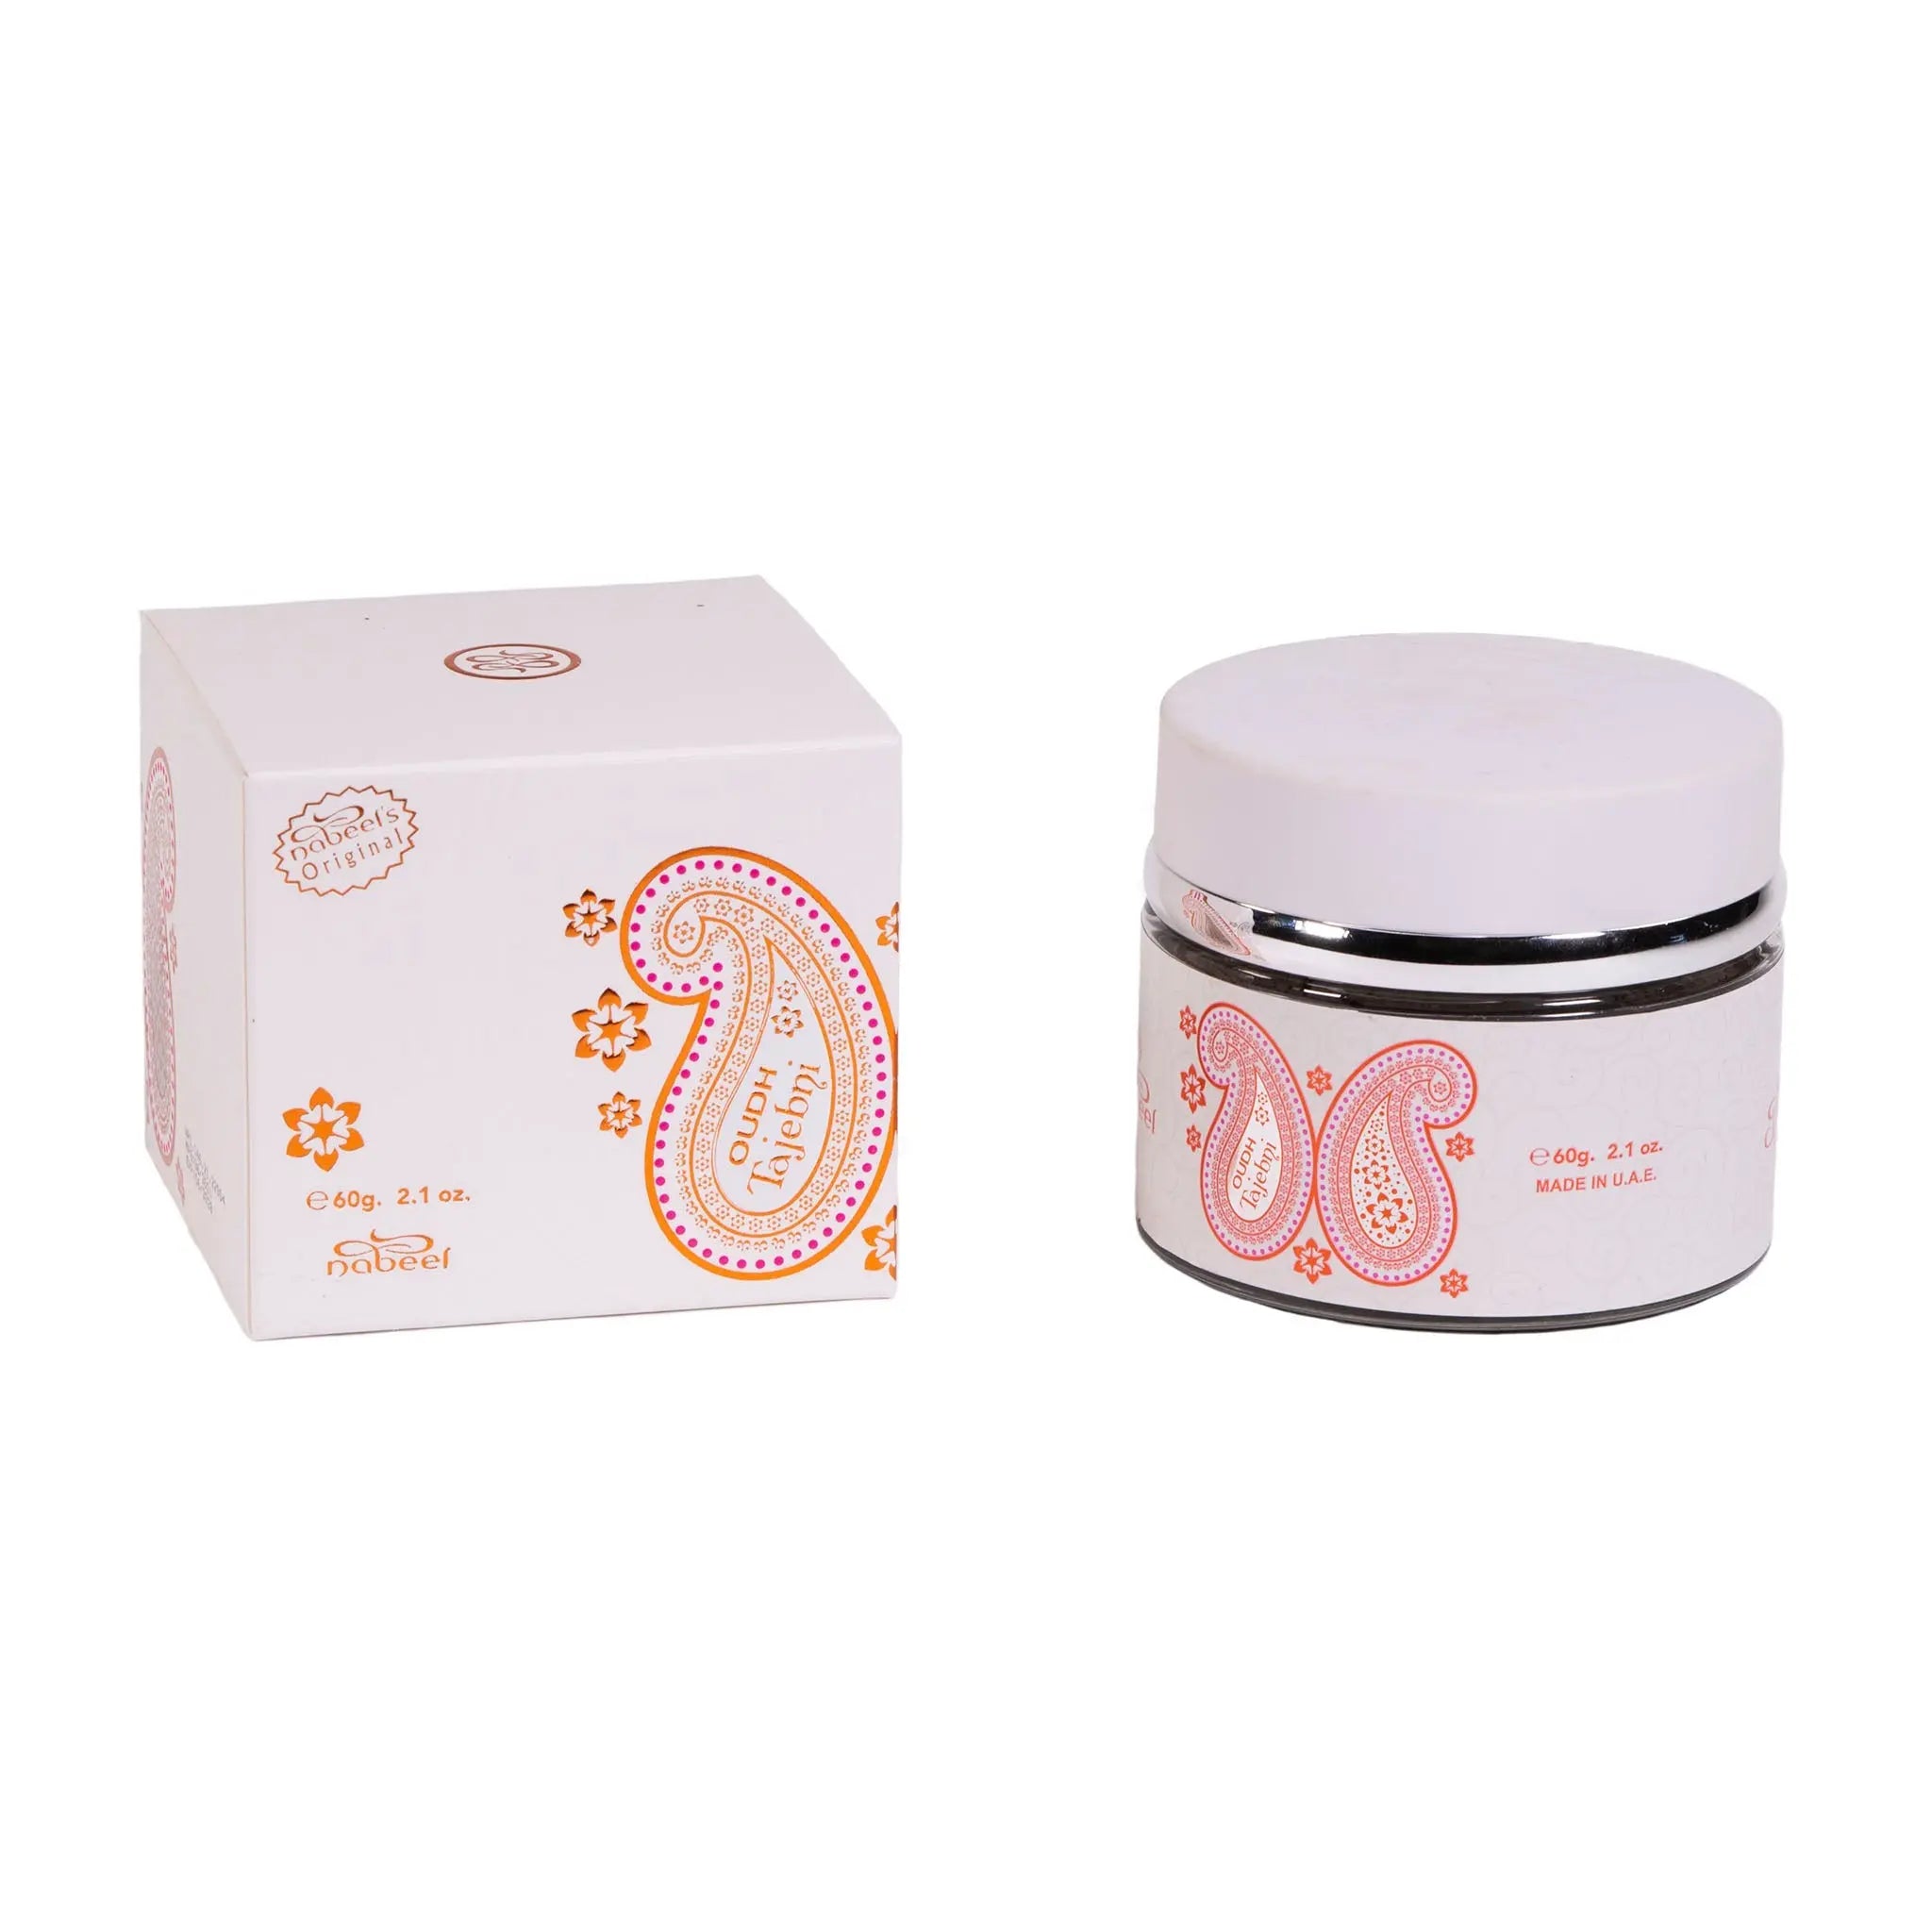 The image showcases a product called "OUDH" in white packaging with orange details. There's a white box and a jar, both adorned with paisley and floral motifs. The box and jar have labels with the product's name and weight, "60g, 2.1 oz.", and a note "MADE IN UAE". The jar has a white lid with a silver band.